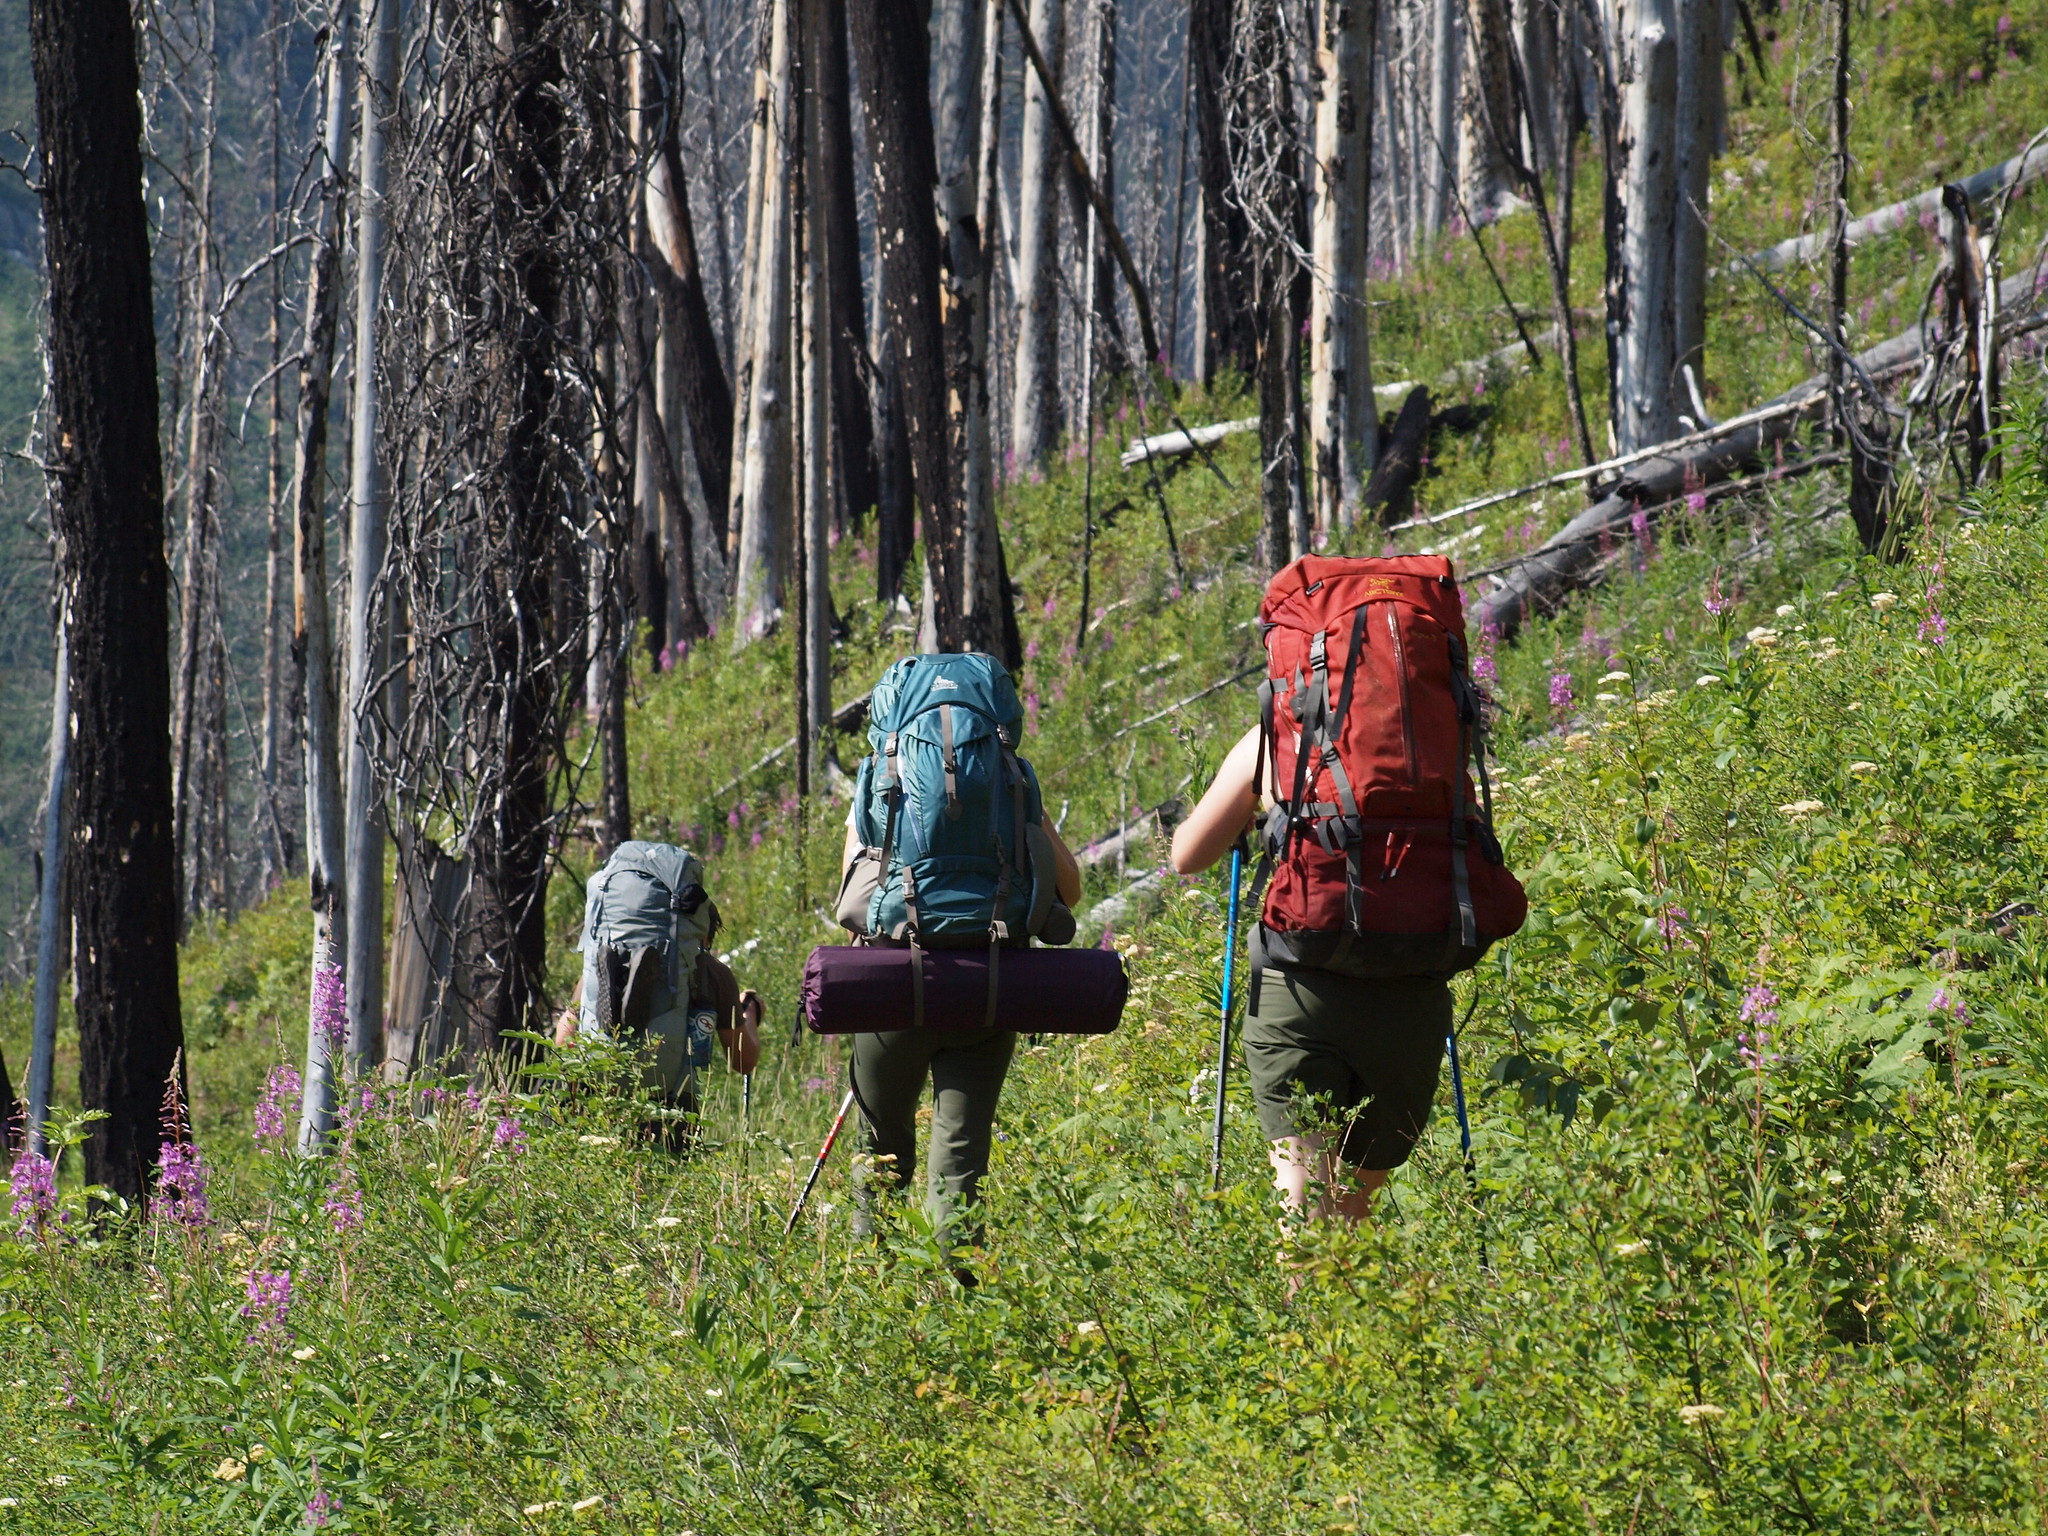 People carrying large backpacks hike through a forest.